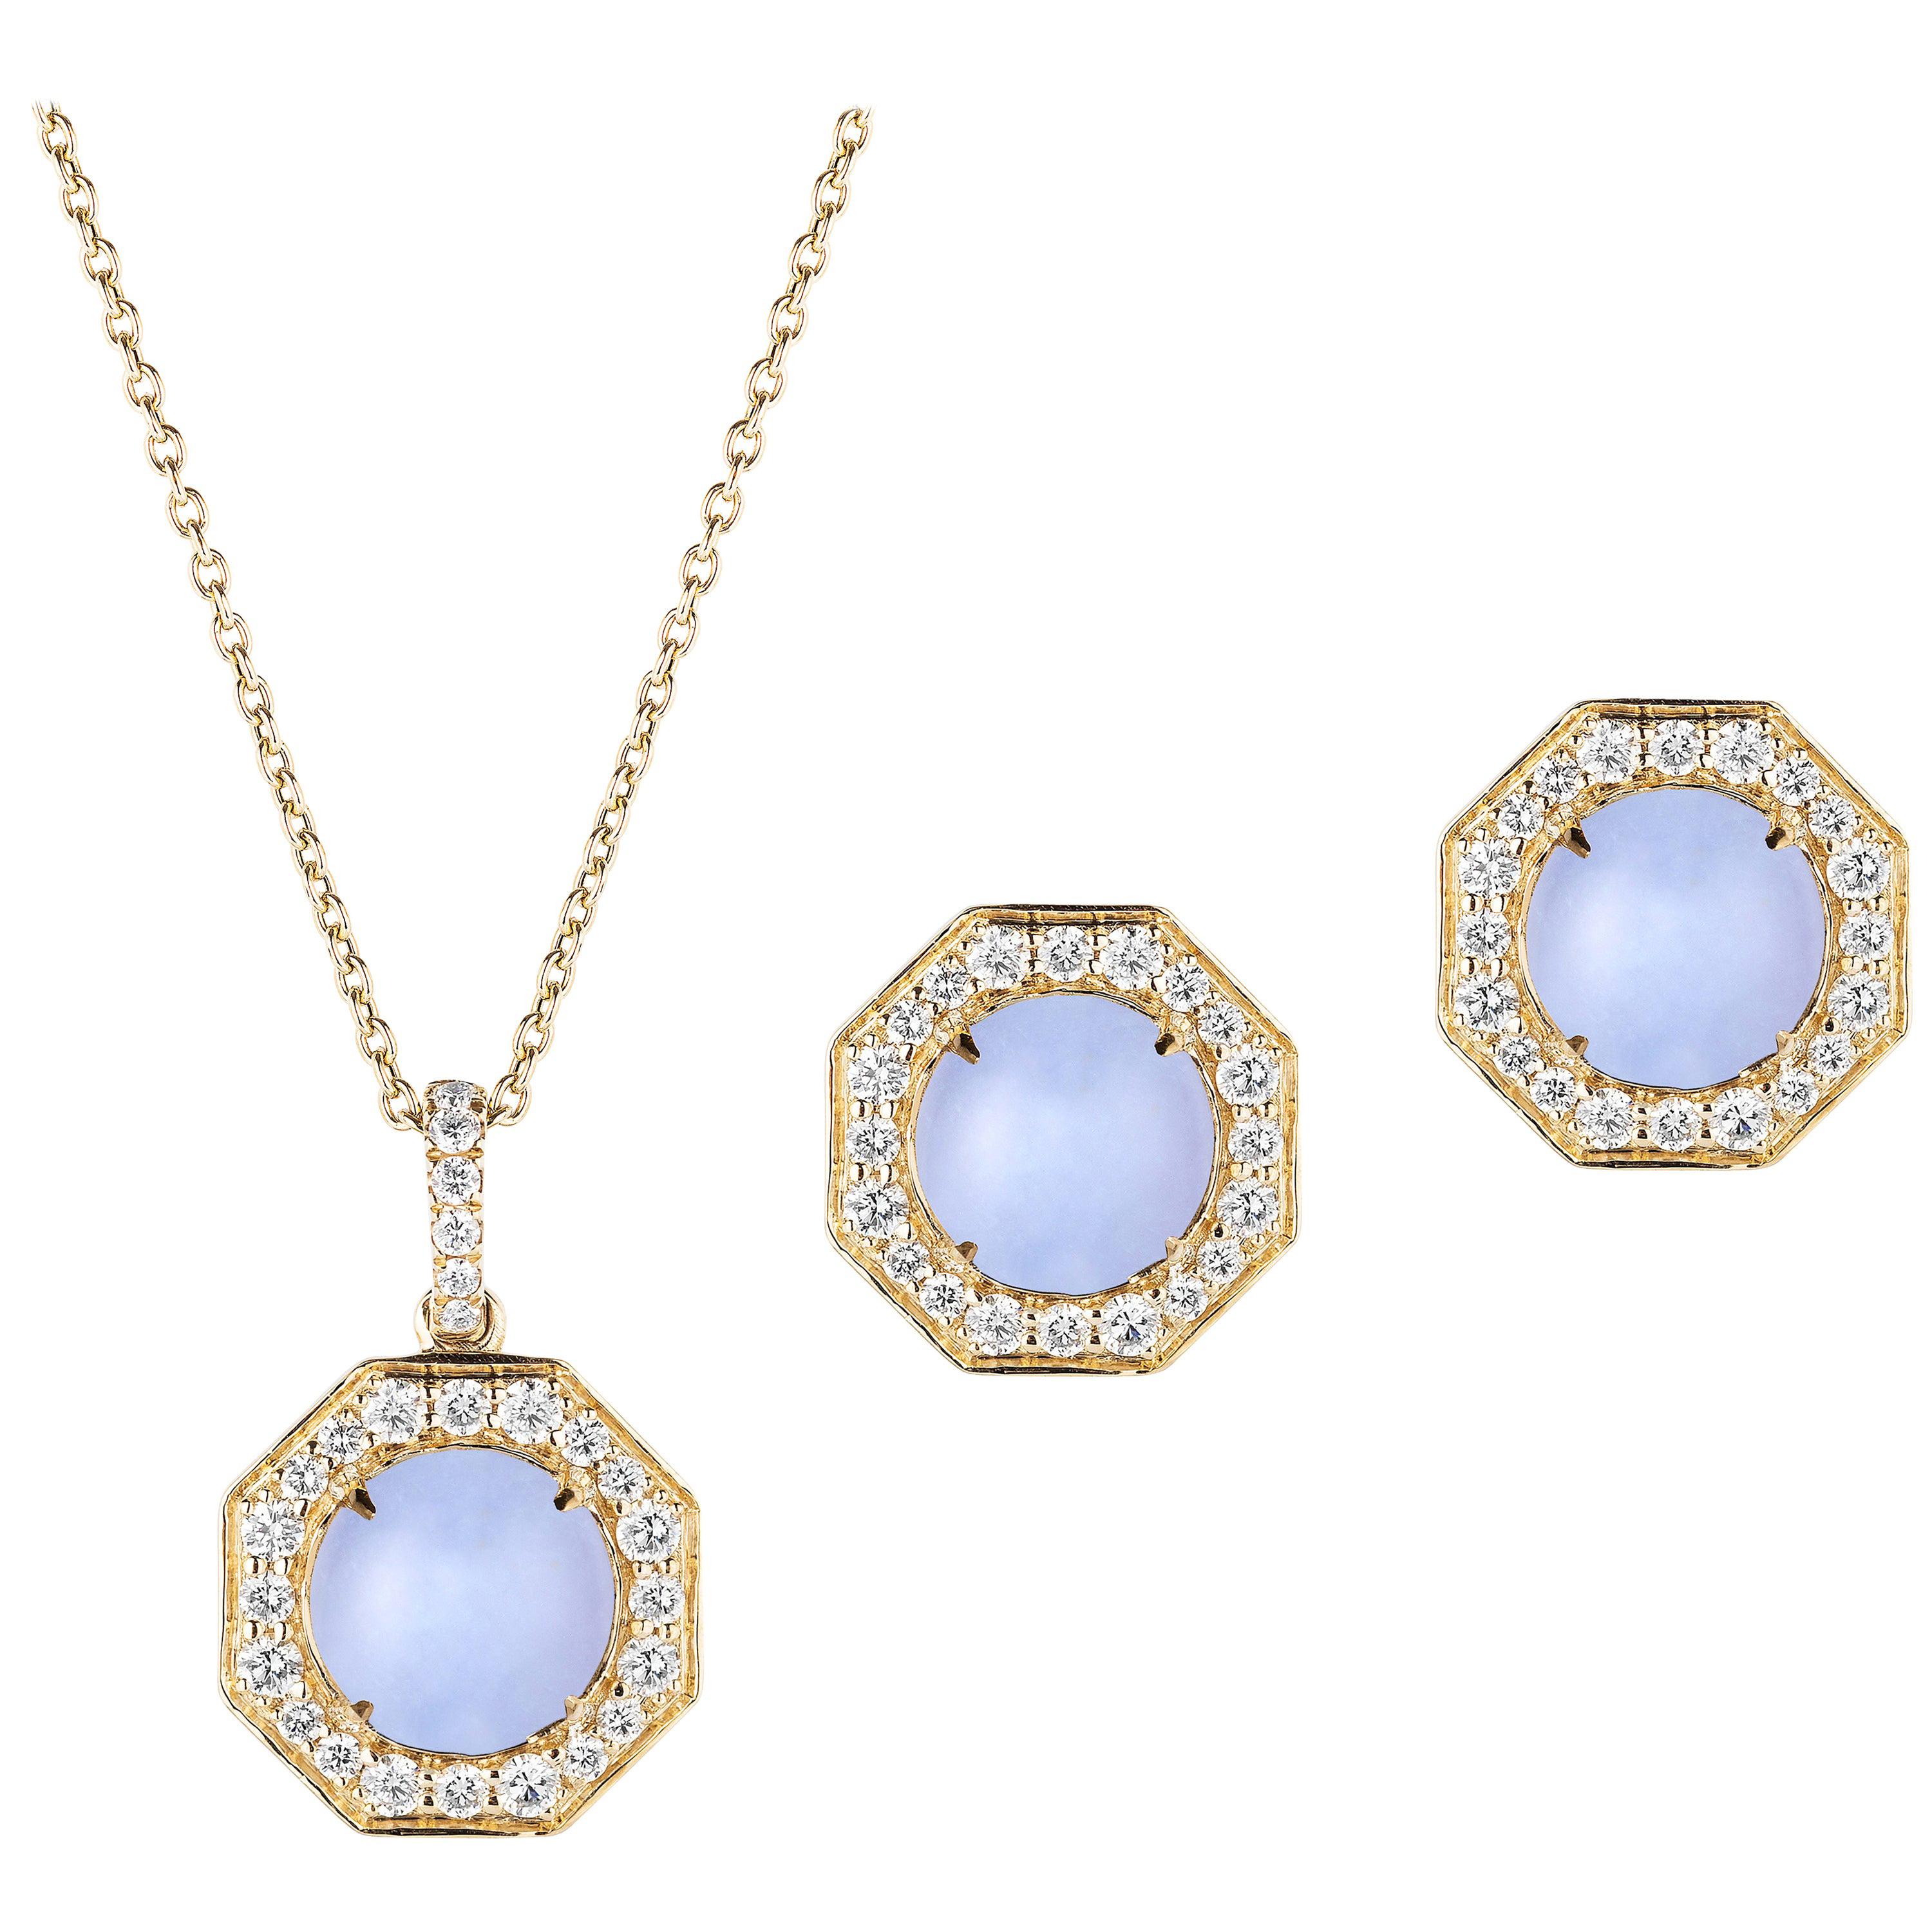 Goshwara Blue Chalcedony Cabochon with Diamond Pendant and Earrings For Sale